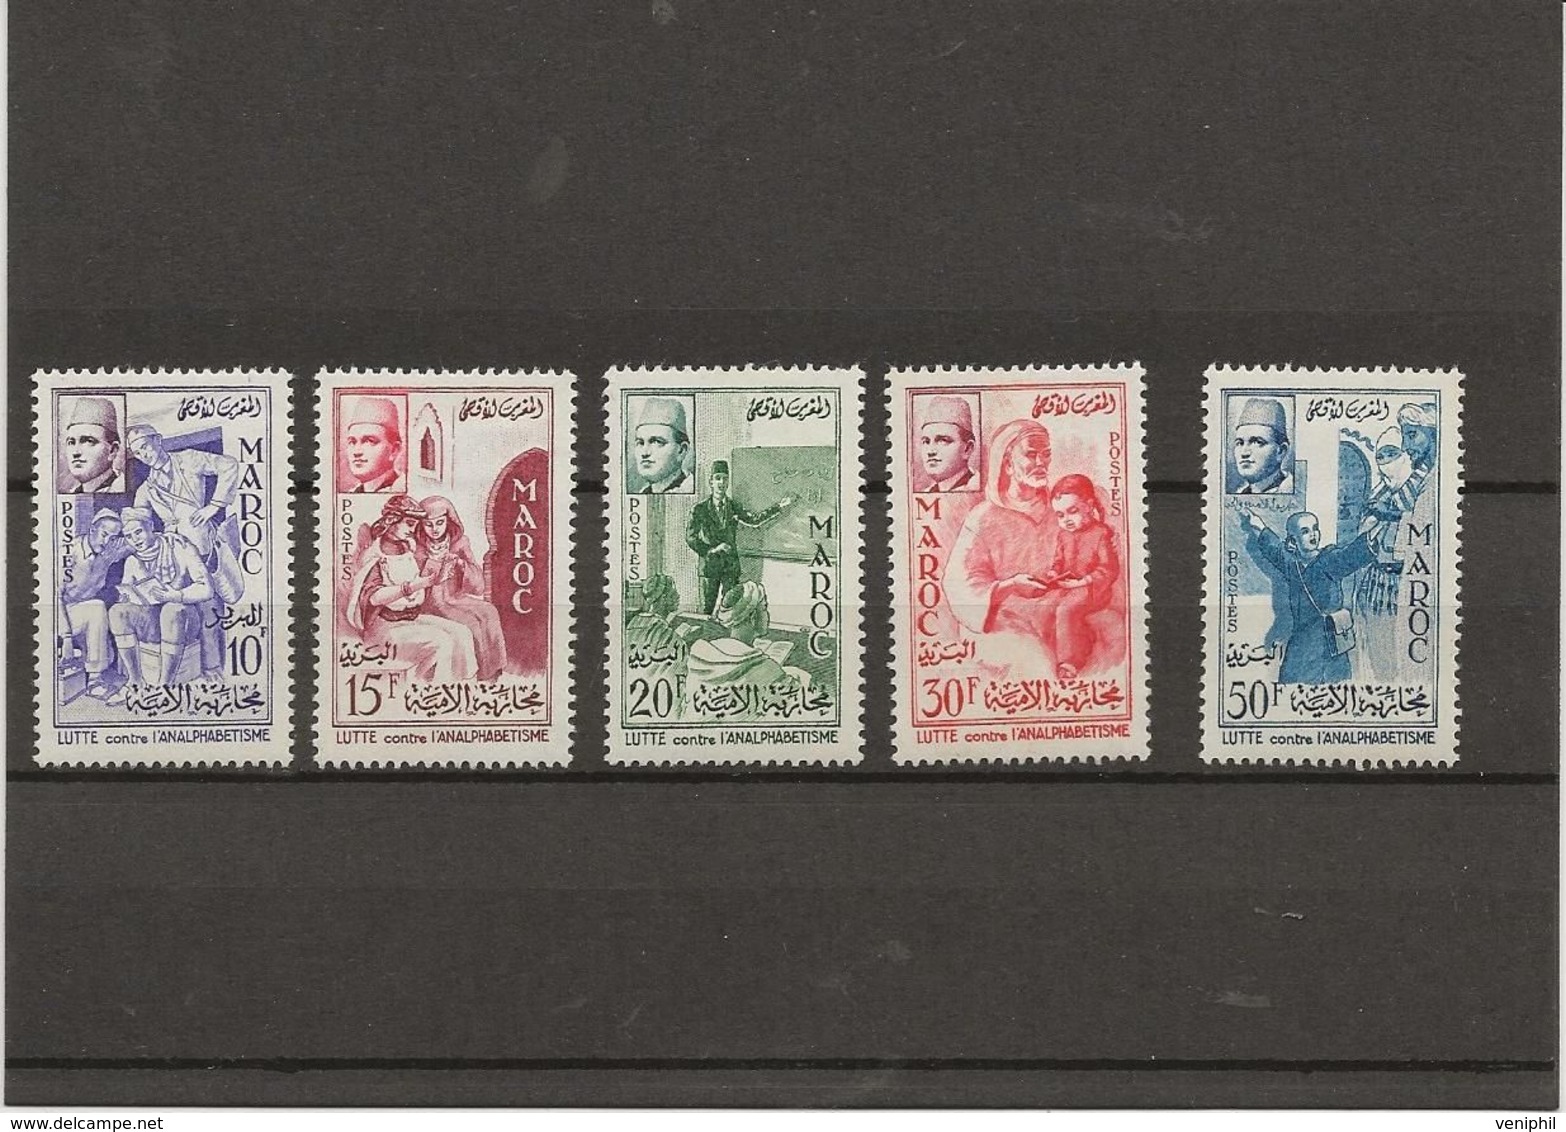 MAROC - TIMBRES N° 369 A 373 NEUF INFIME CHARNIERE -ANNEE 1956 -COTE : 27 € - Ungebraucht